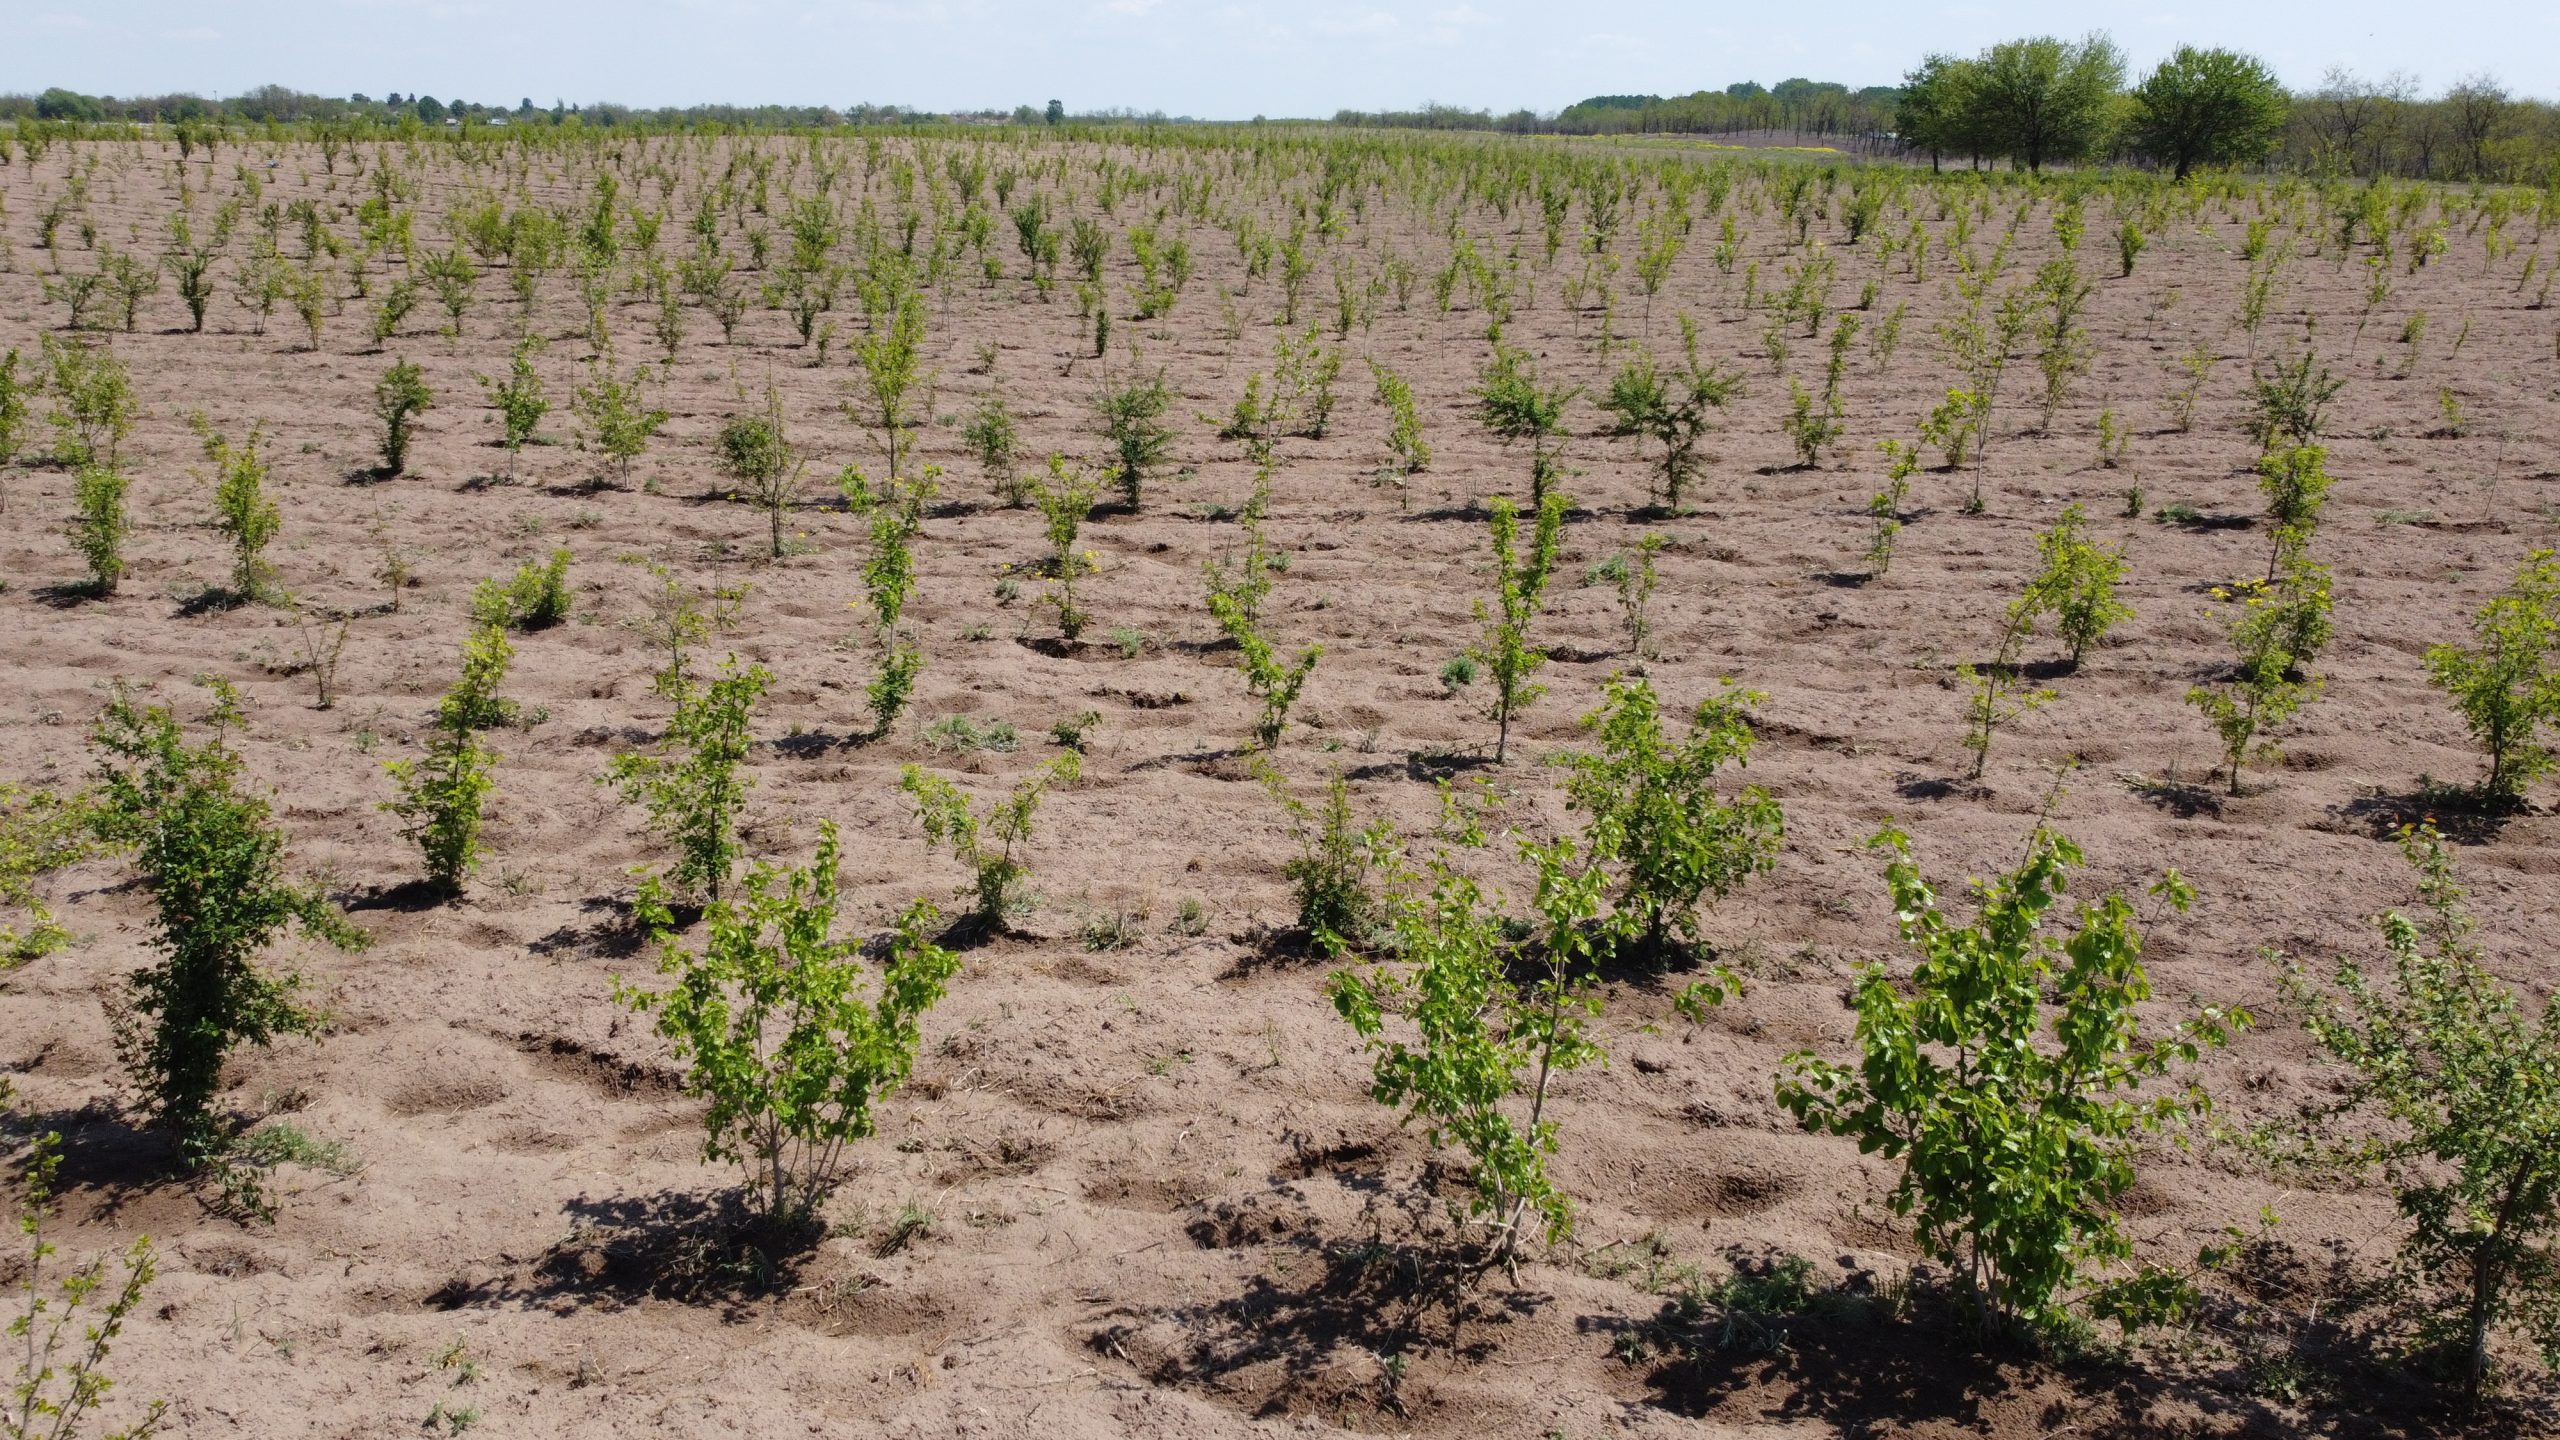 Planting trees for climate change and desertification